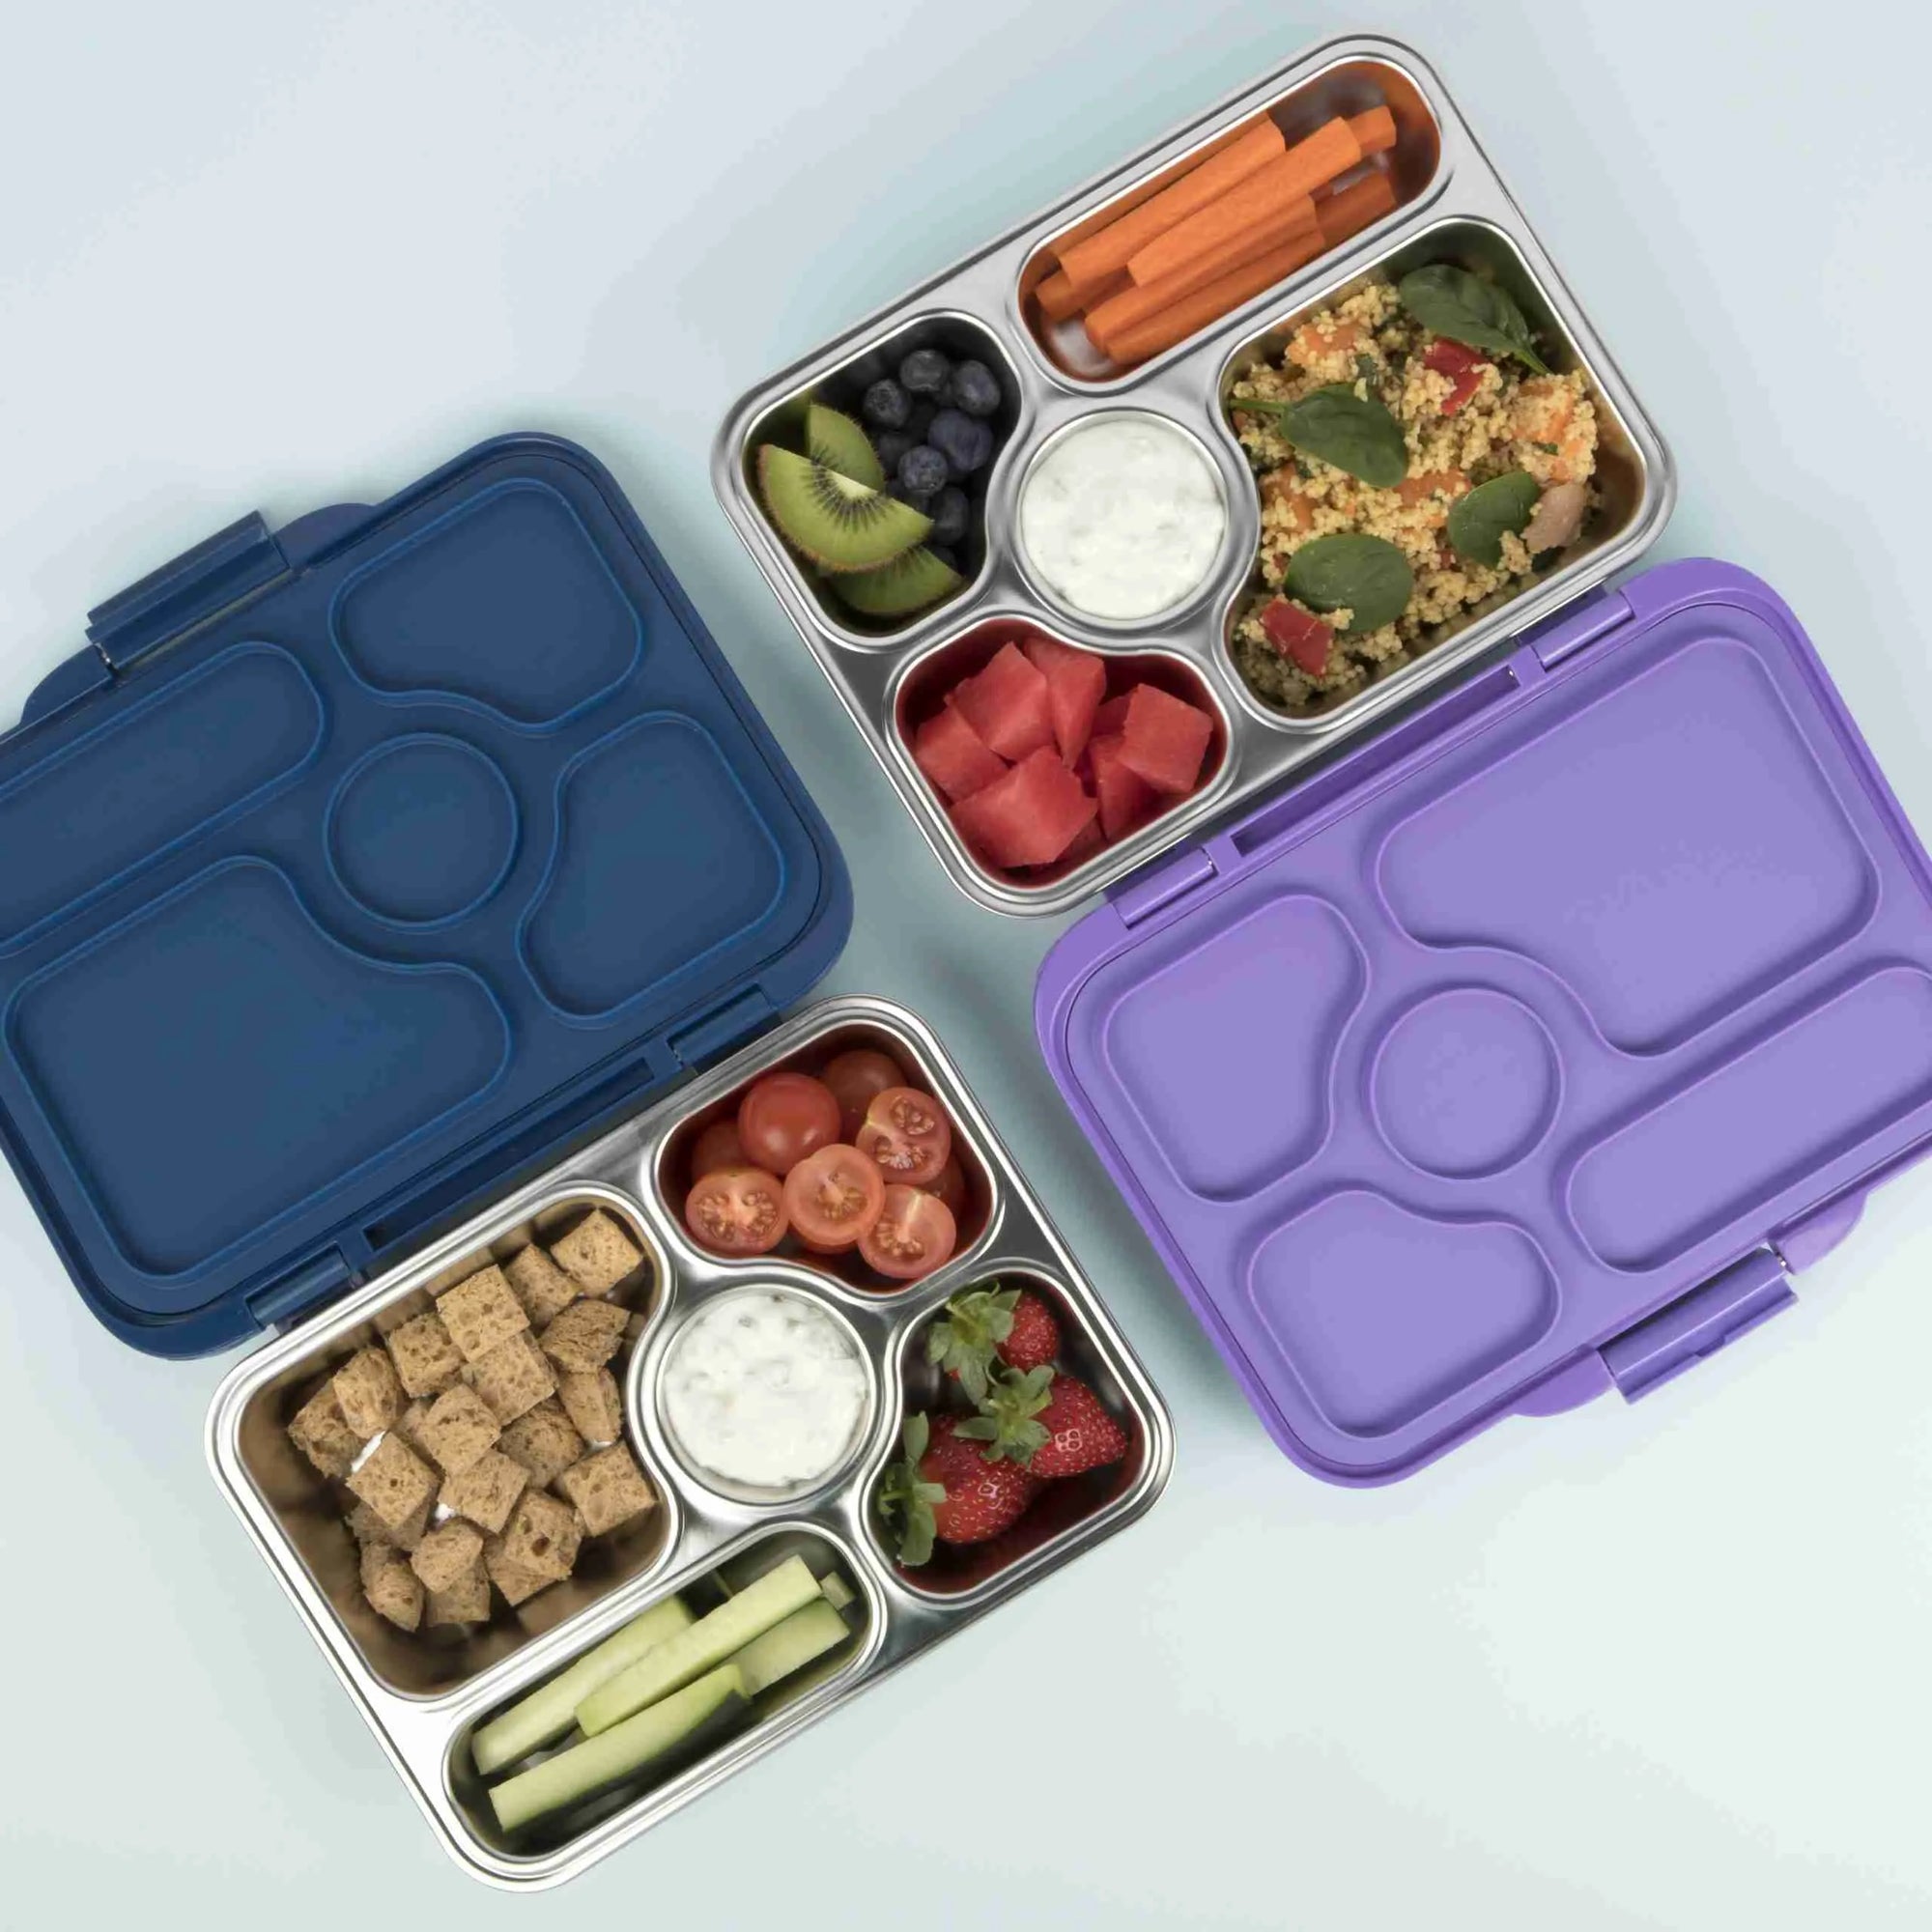 Yumbox Presto | Stainless Steel Leakproof Bento Box - Remy Lavender